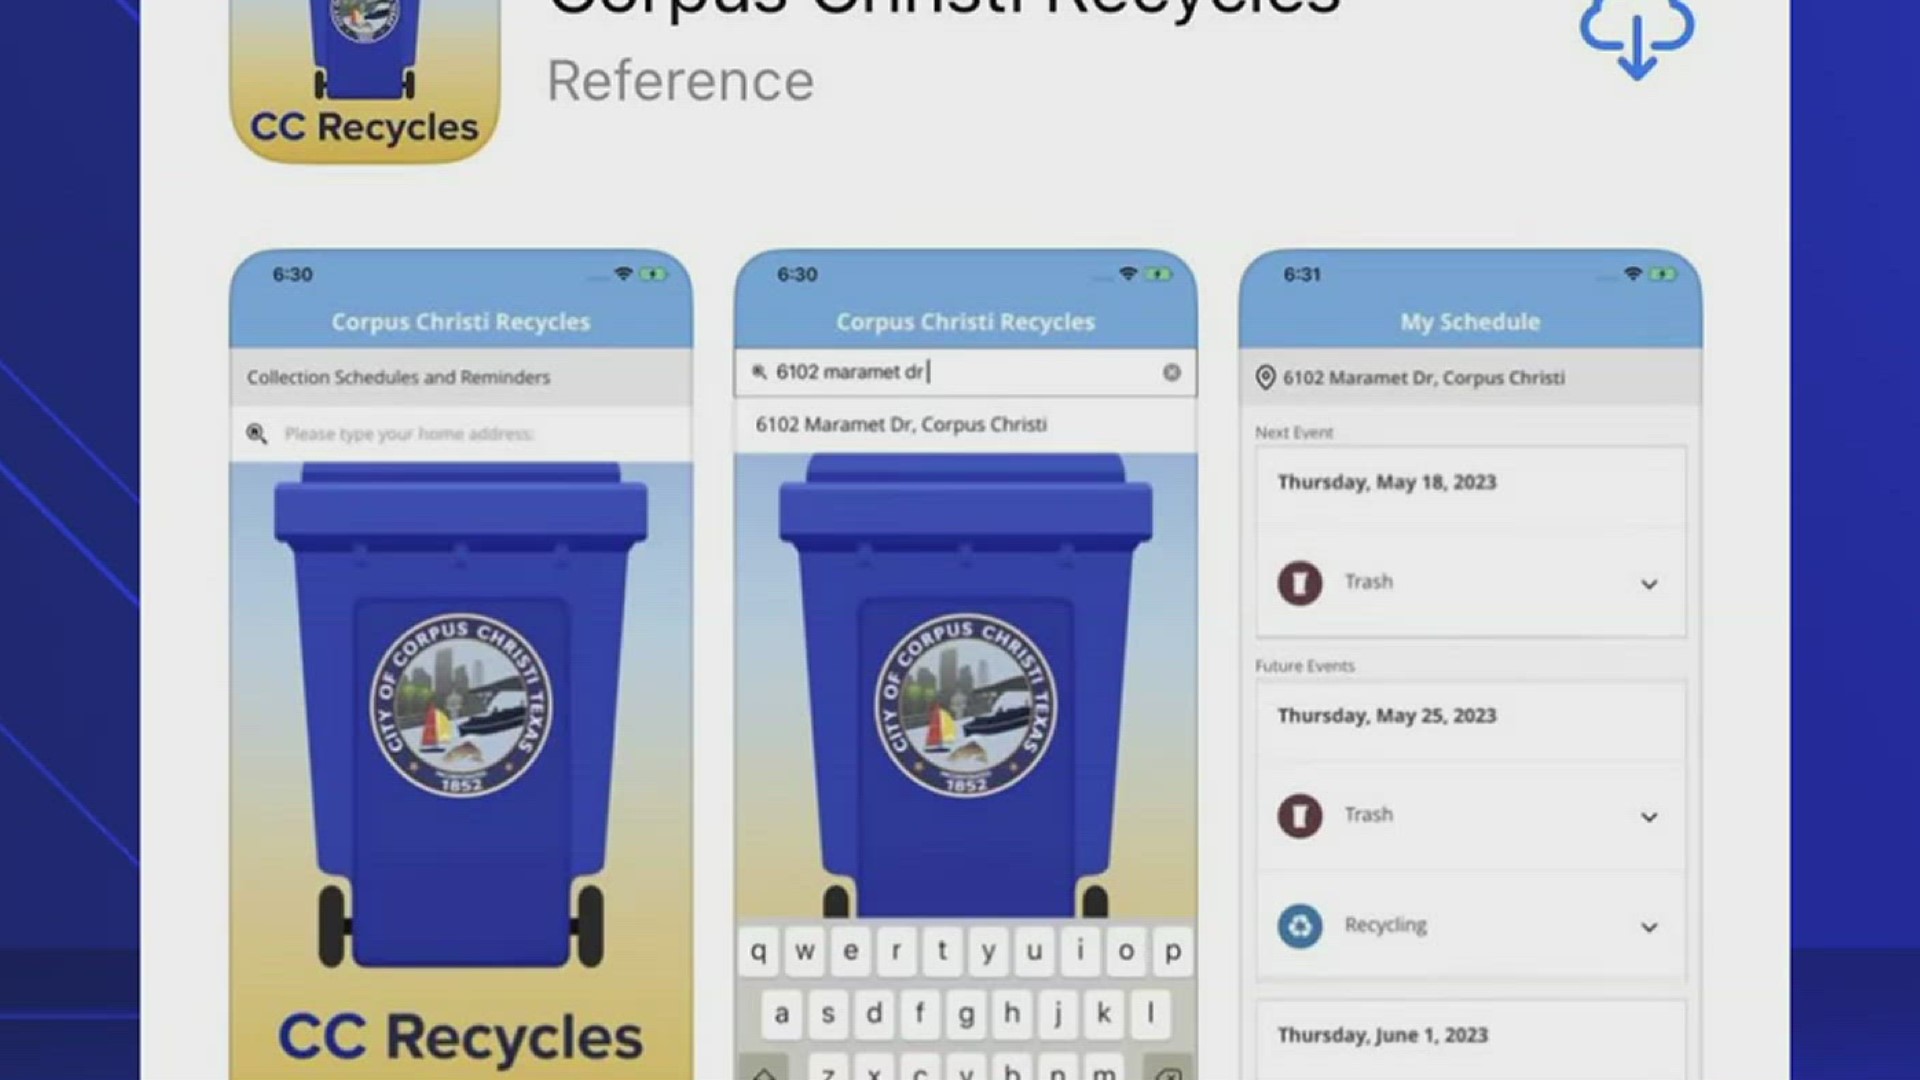 Corpus Christi Assistant Director of Solid Waste Paul Bass said the new app will be helpful in communicating when they are collecting post storm debris.